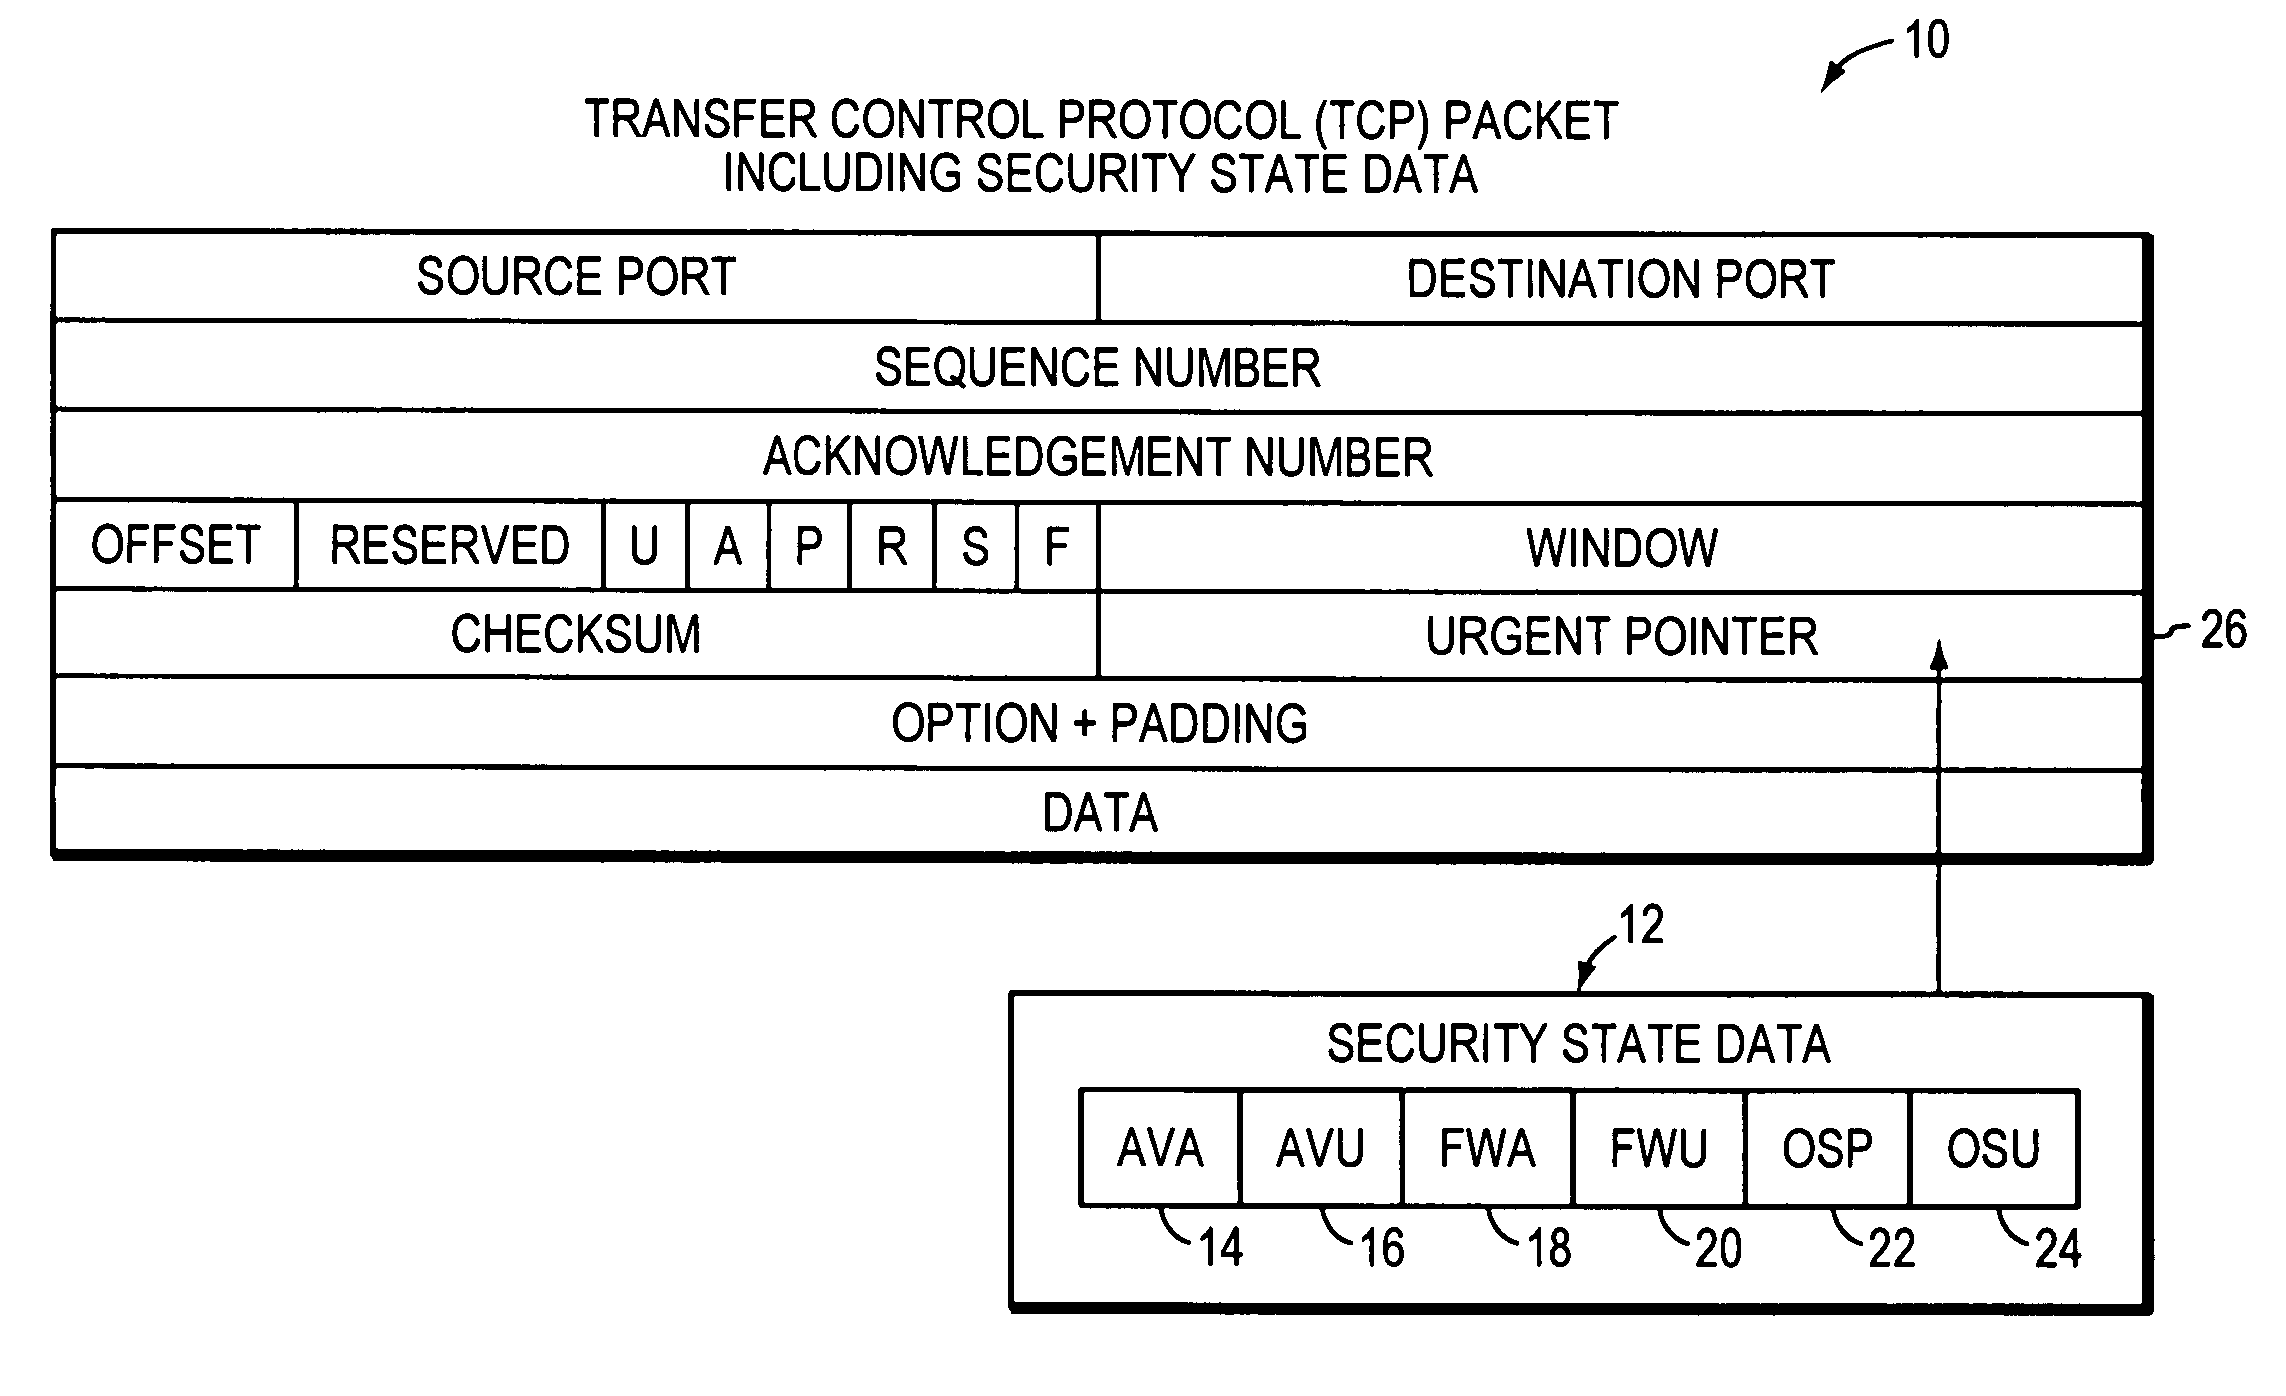 System, apparatuses, methods and computer-readable media for determining security status of computer before establishing network connection second group of embodiments-claim set II